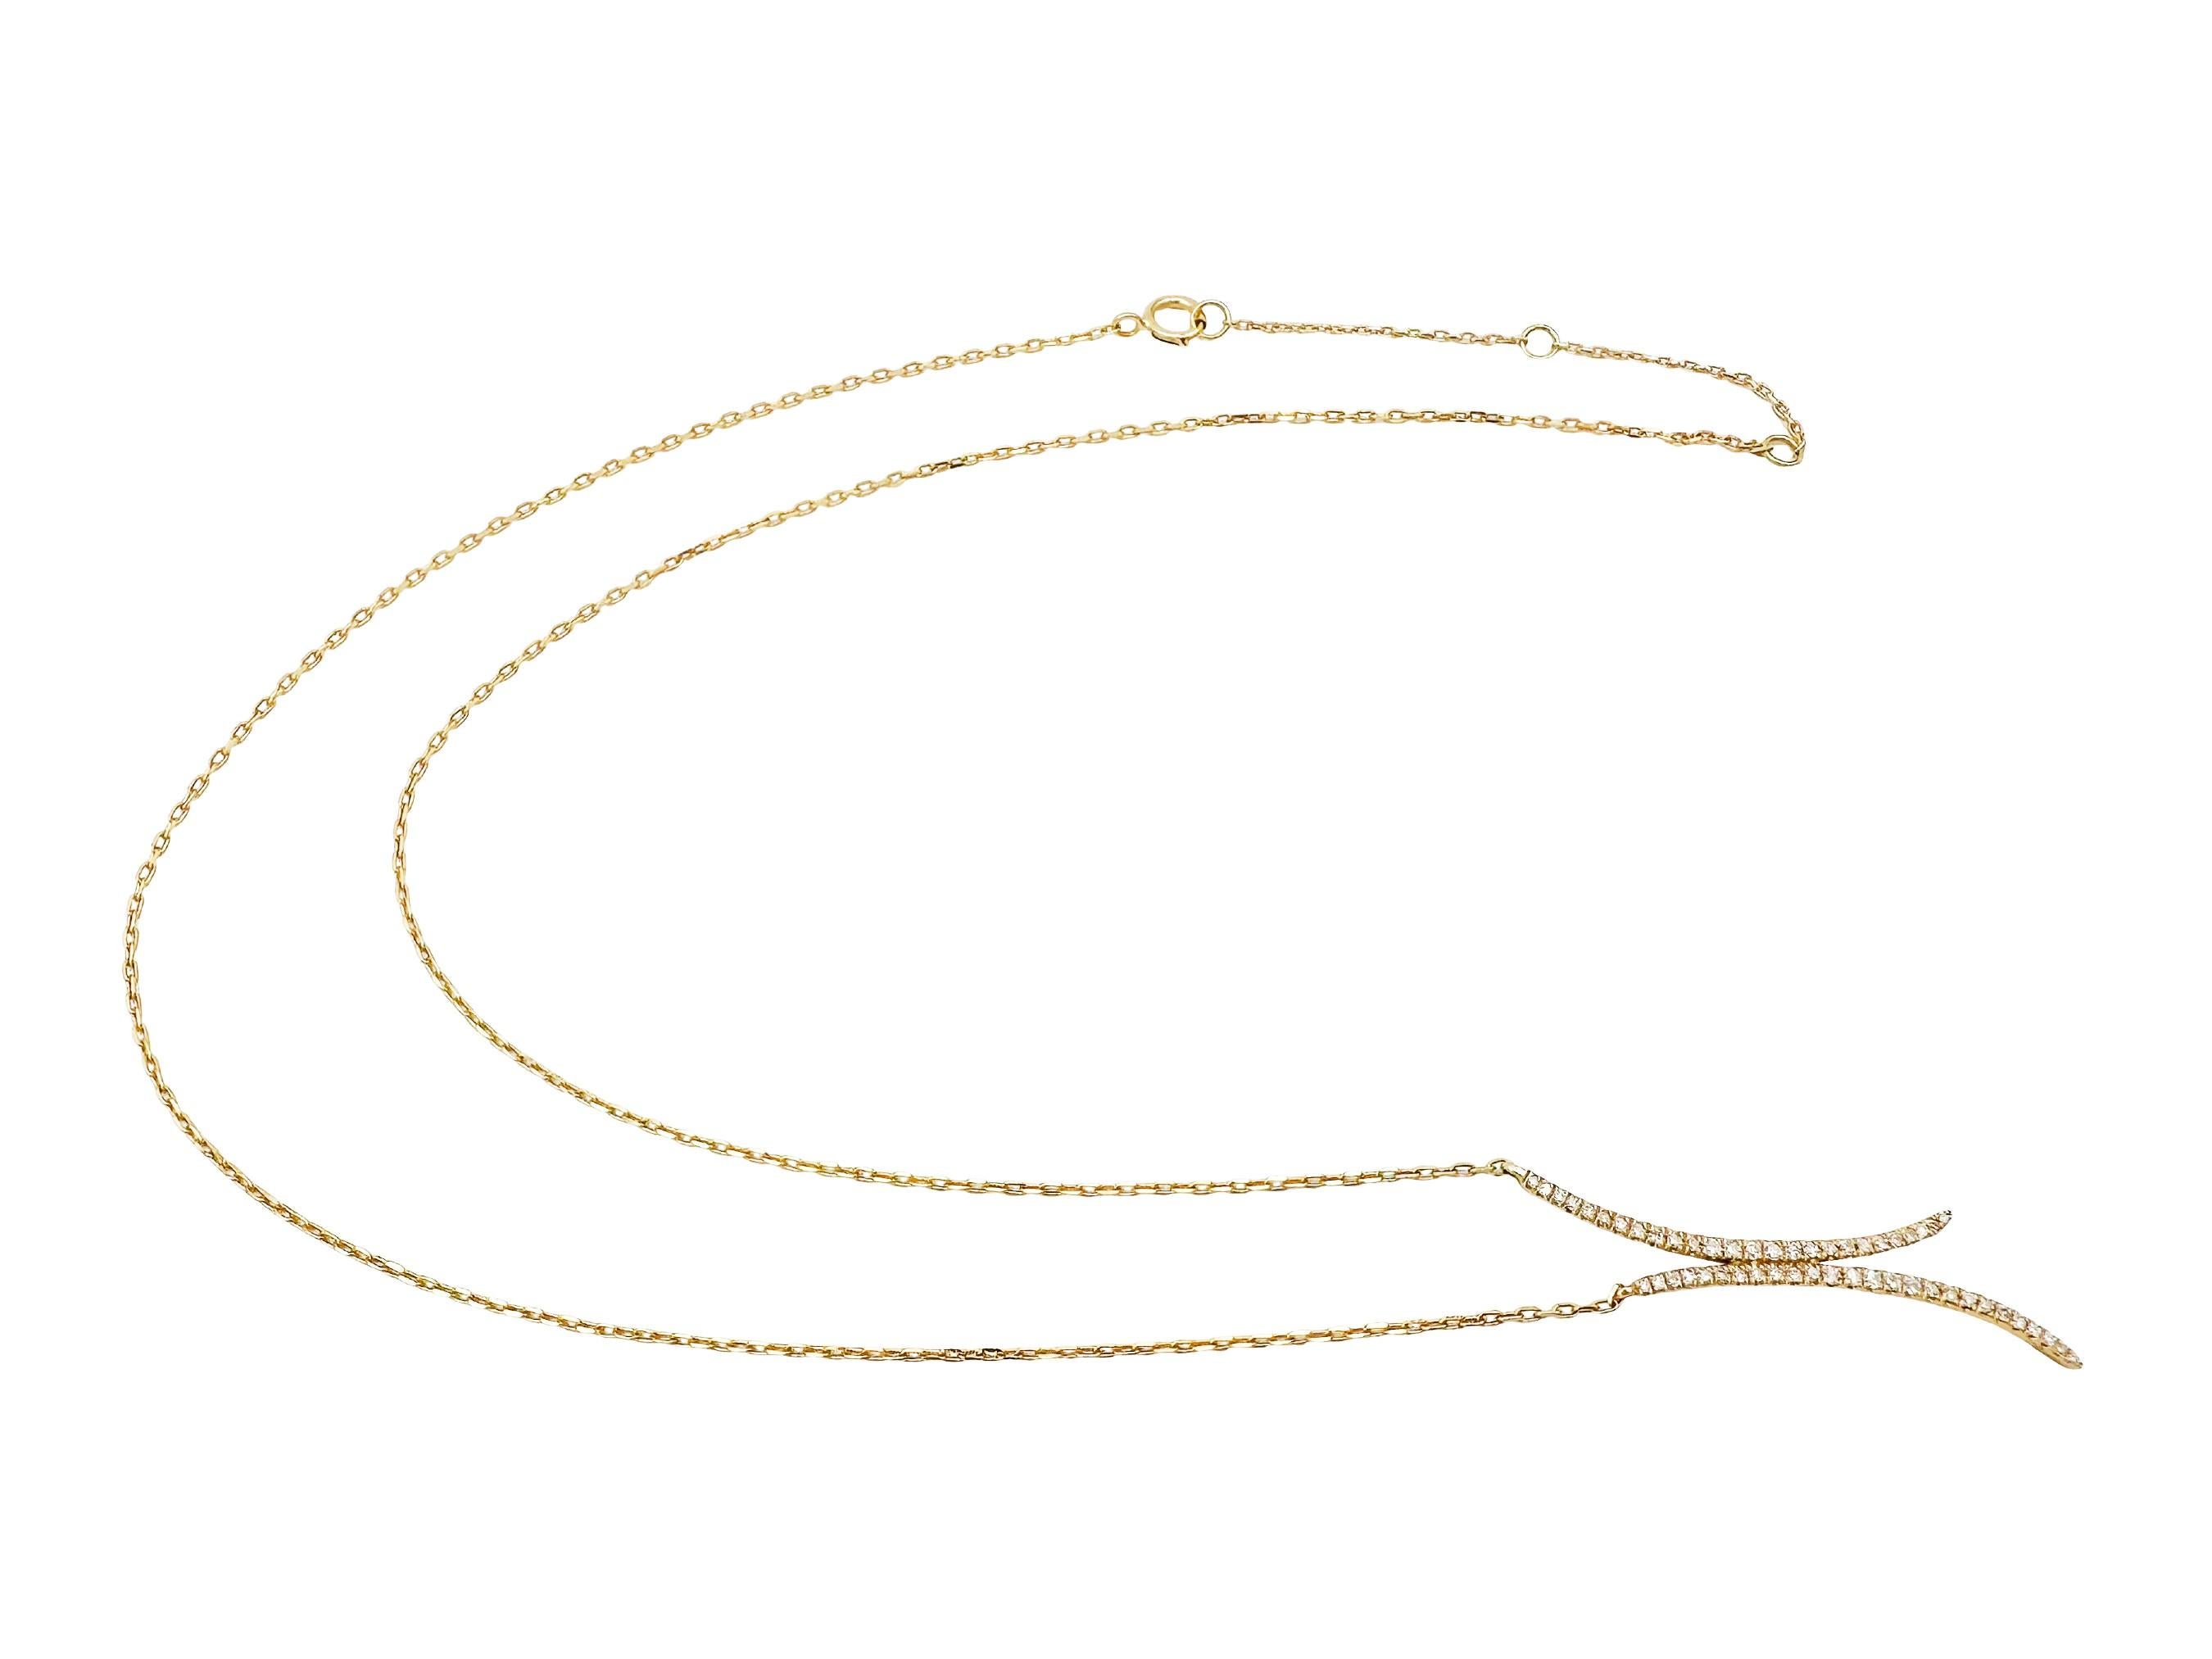 This gorgeous necklace by Casa Reale features a pendant formed of two elongated diamond pavé crescent moons nestled against each other. Set in 14k yellow gold, the pendant gives just the right amount of sparkle to transition perfectly from day to